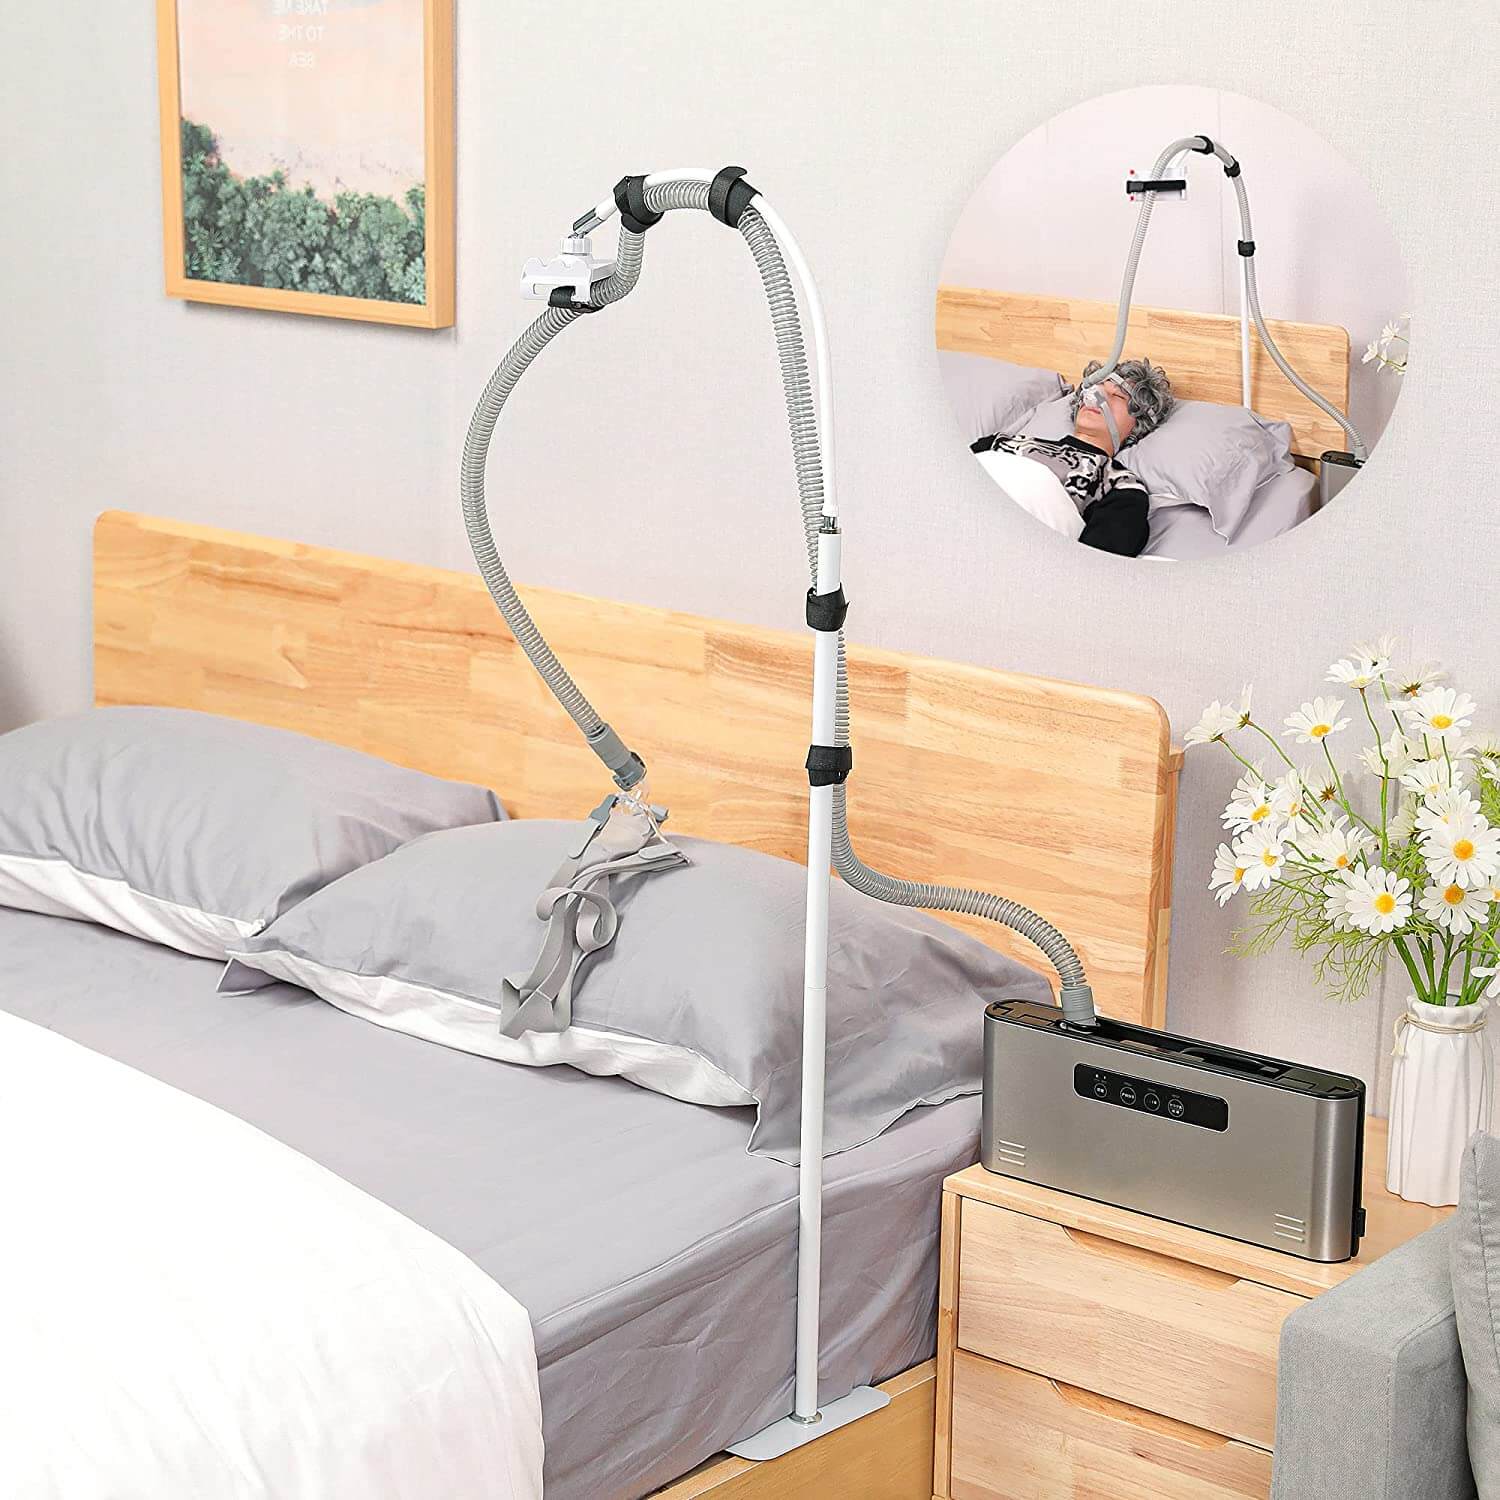 CPAP hose holder/stand with 360° rotating clip & adjustable arm for bed, the stand position